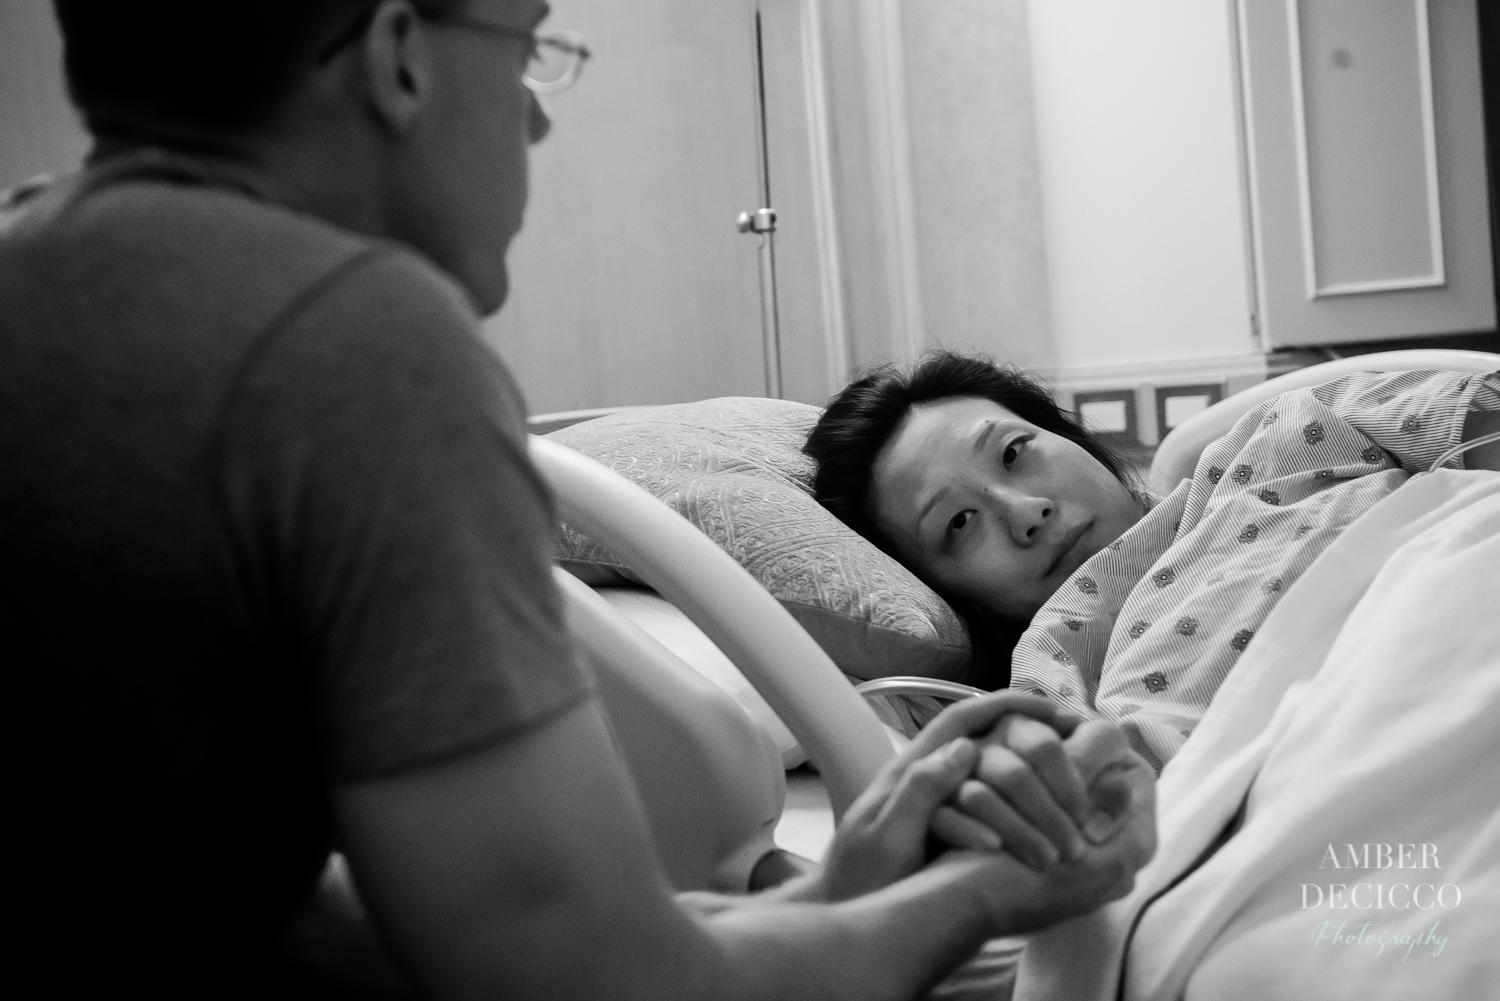 Dad comforts mom during labor | Birth Photography ©Amber DeCicco Photography